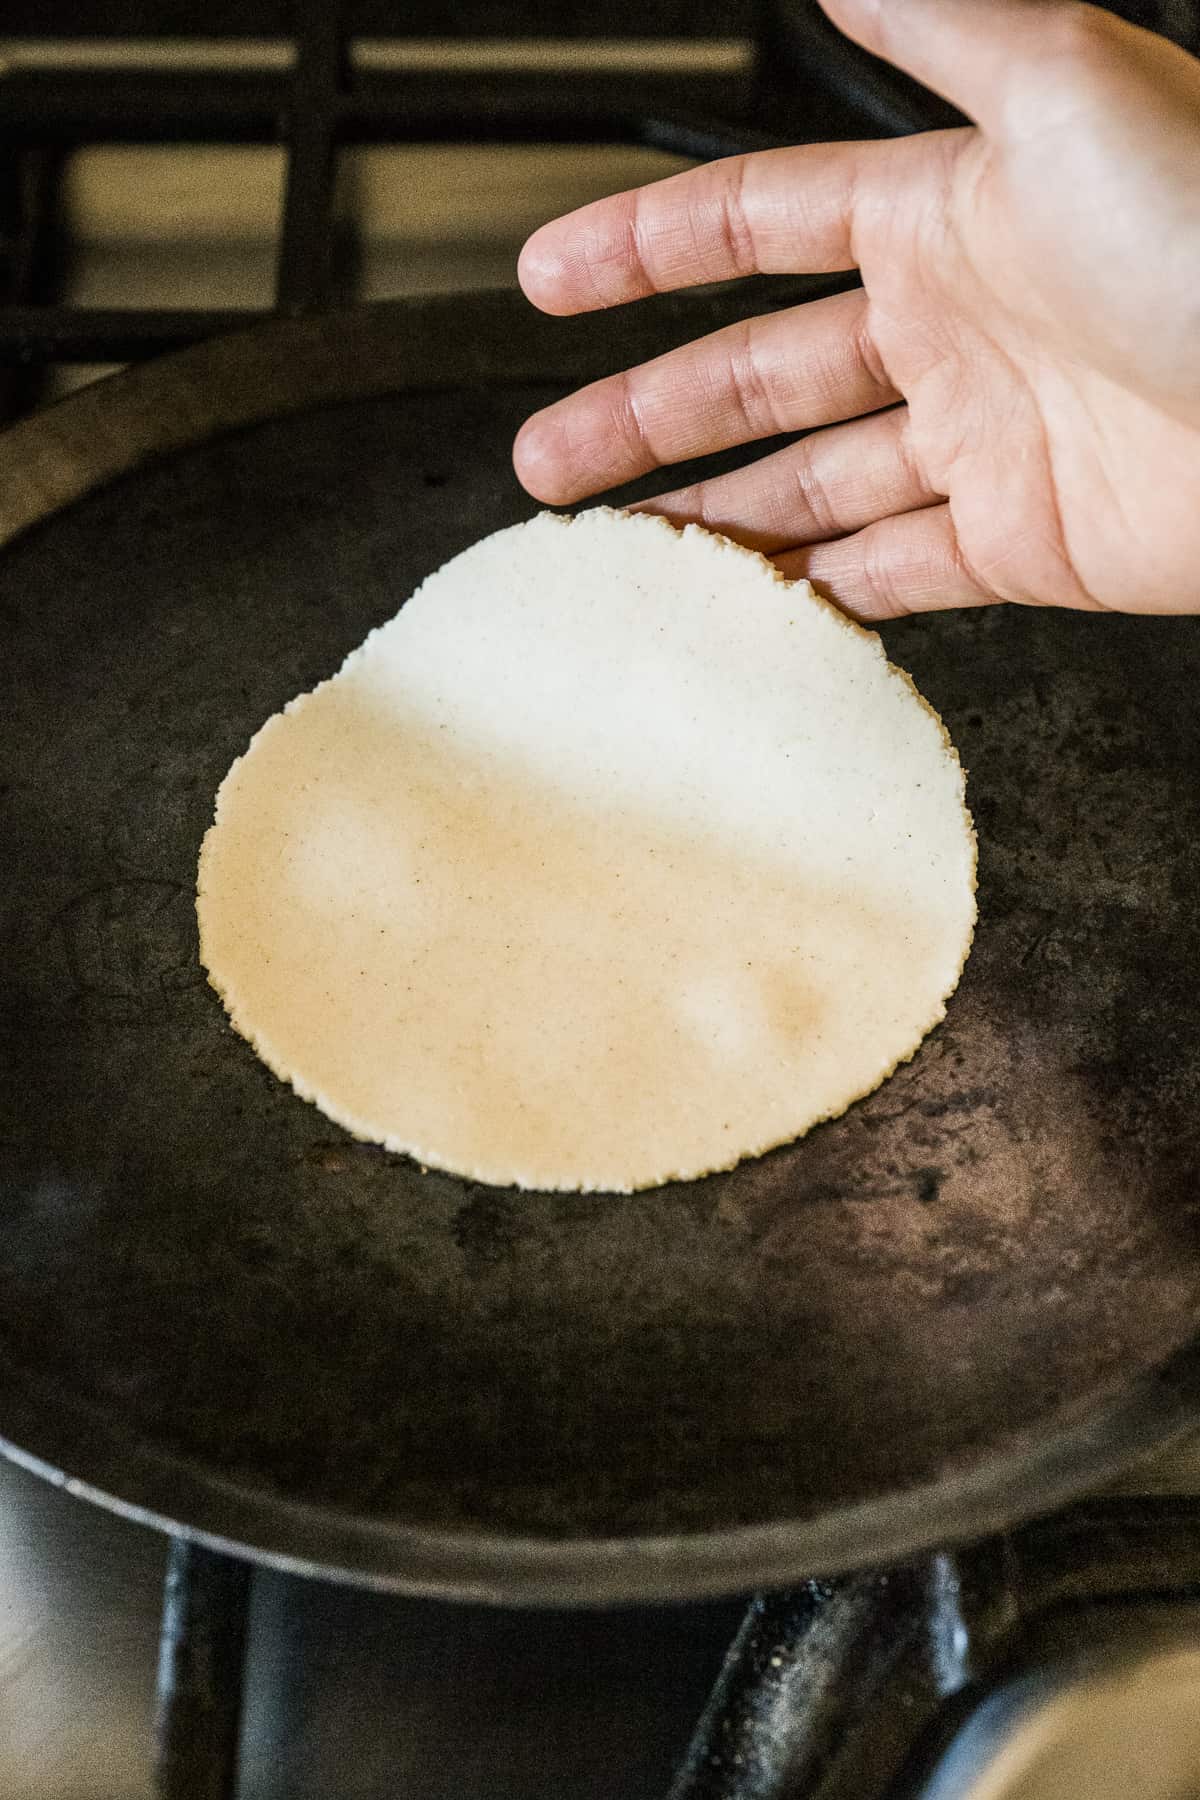 A corn tortilla being cooked on a comal.